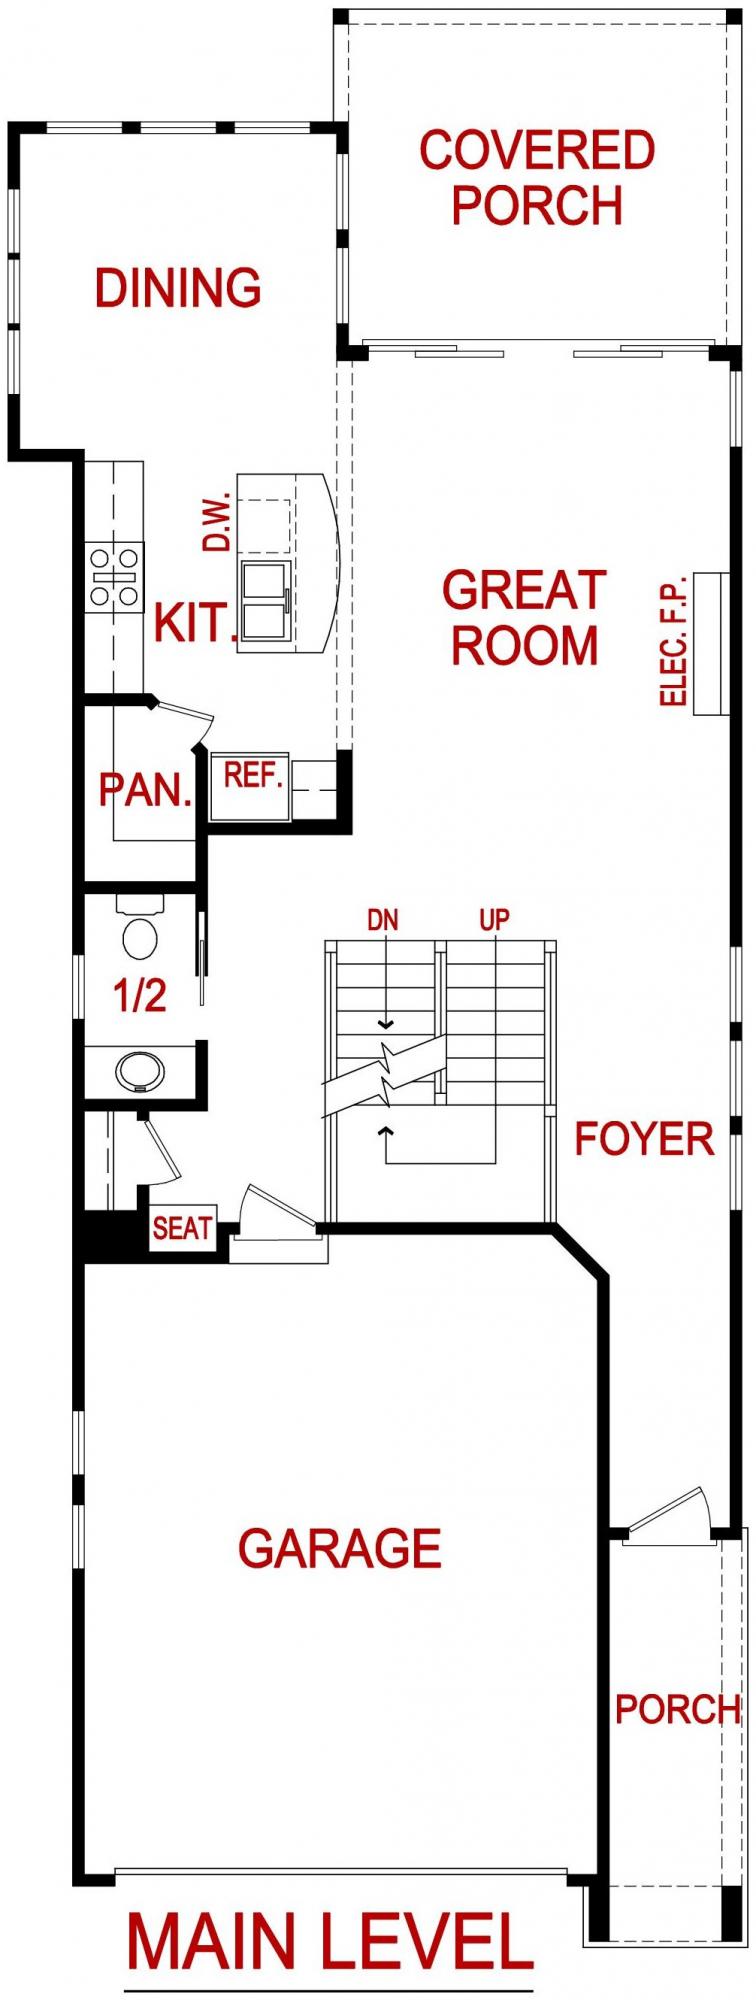 Main level floor plan of the Morgan expanded model from lambie homes